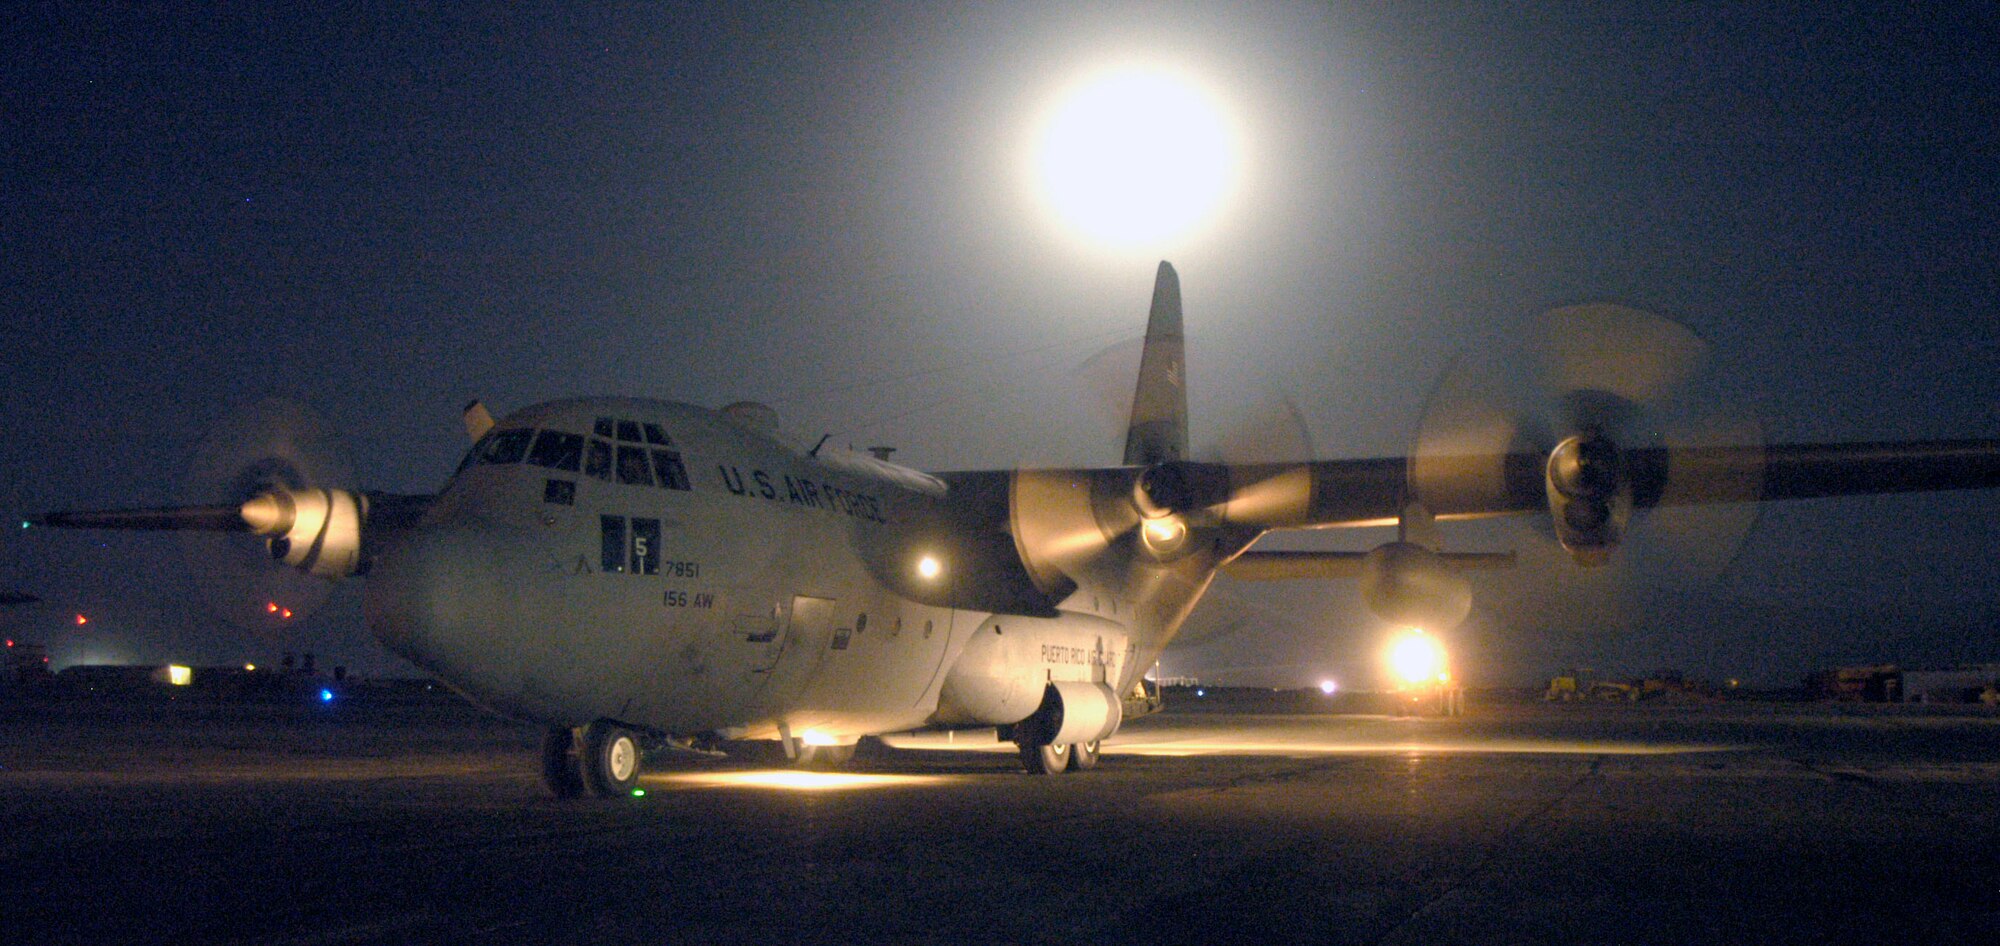 A C-130 Hercules from the 156th Airlift Wing, Puerto Rico Air National Guard, with 39 Guardsmen arrives at Bagram Airfield, Afghanistan, Sept. 8.  This is the first time the 156th has deployed to a combat zone.  They will support Operation Enduring Freedom with aircraft, aircrews and maintenance personnel for the next four months.  (U.S. Air Force photo/Maj David Kurle)